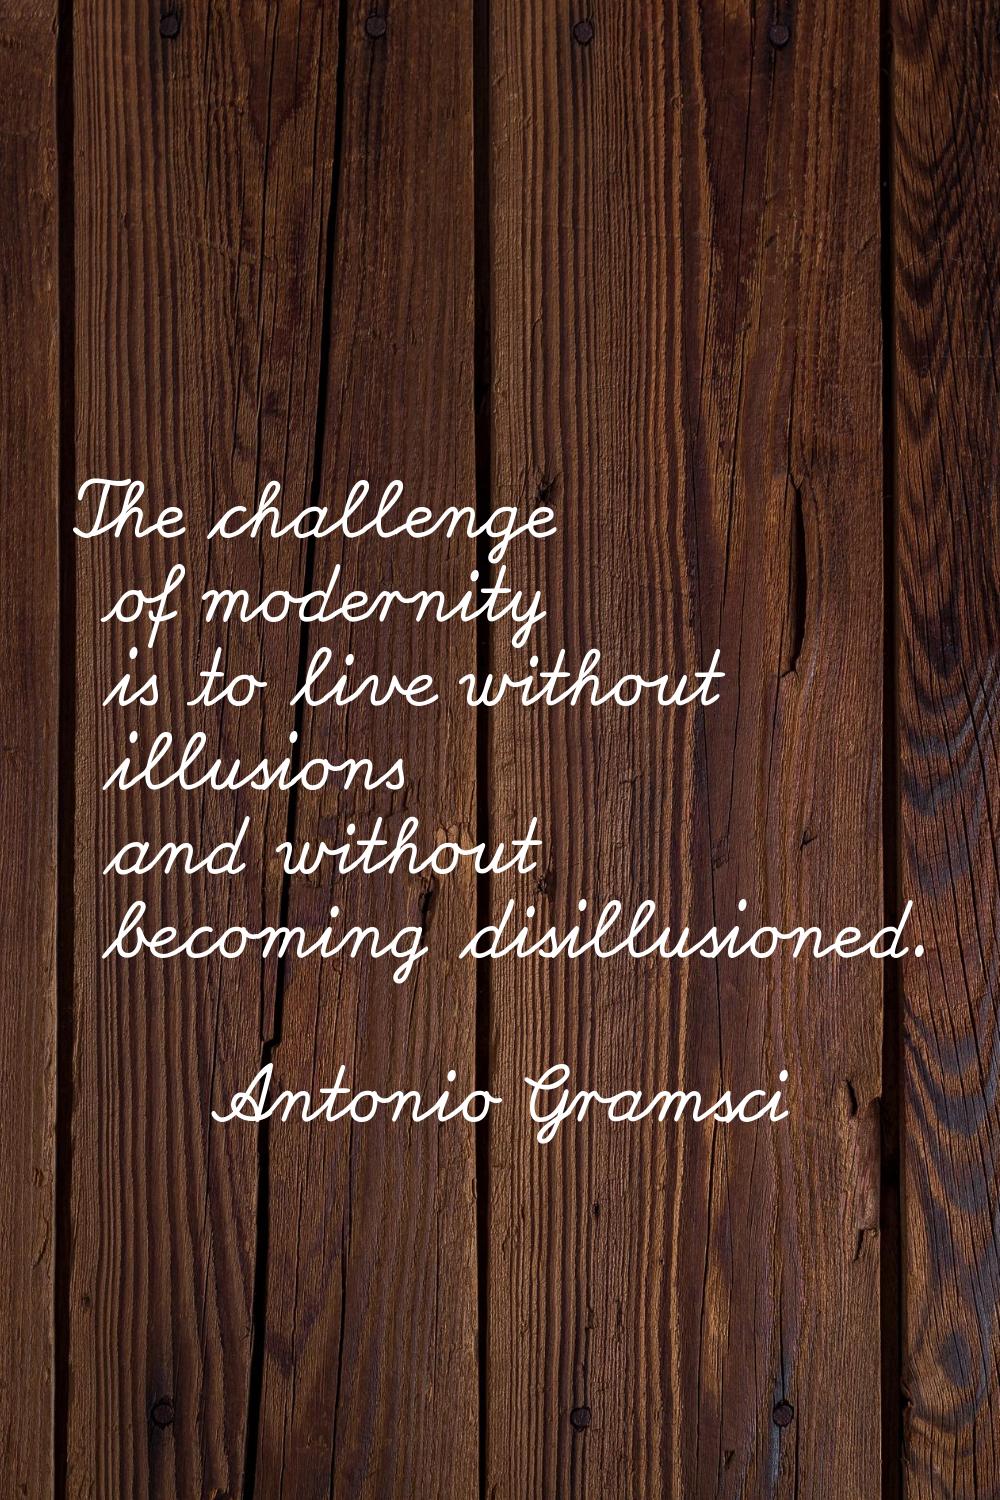 The challenge of modernity is to live without illusions and without becoming disillusioned.